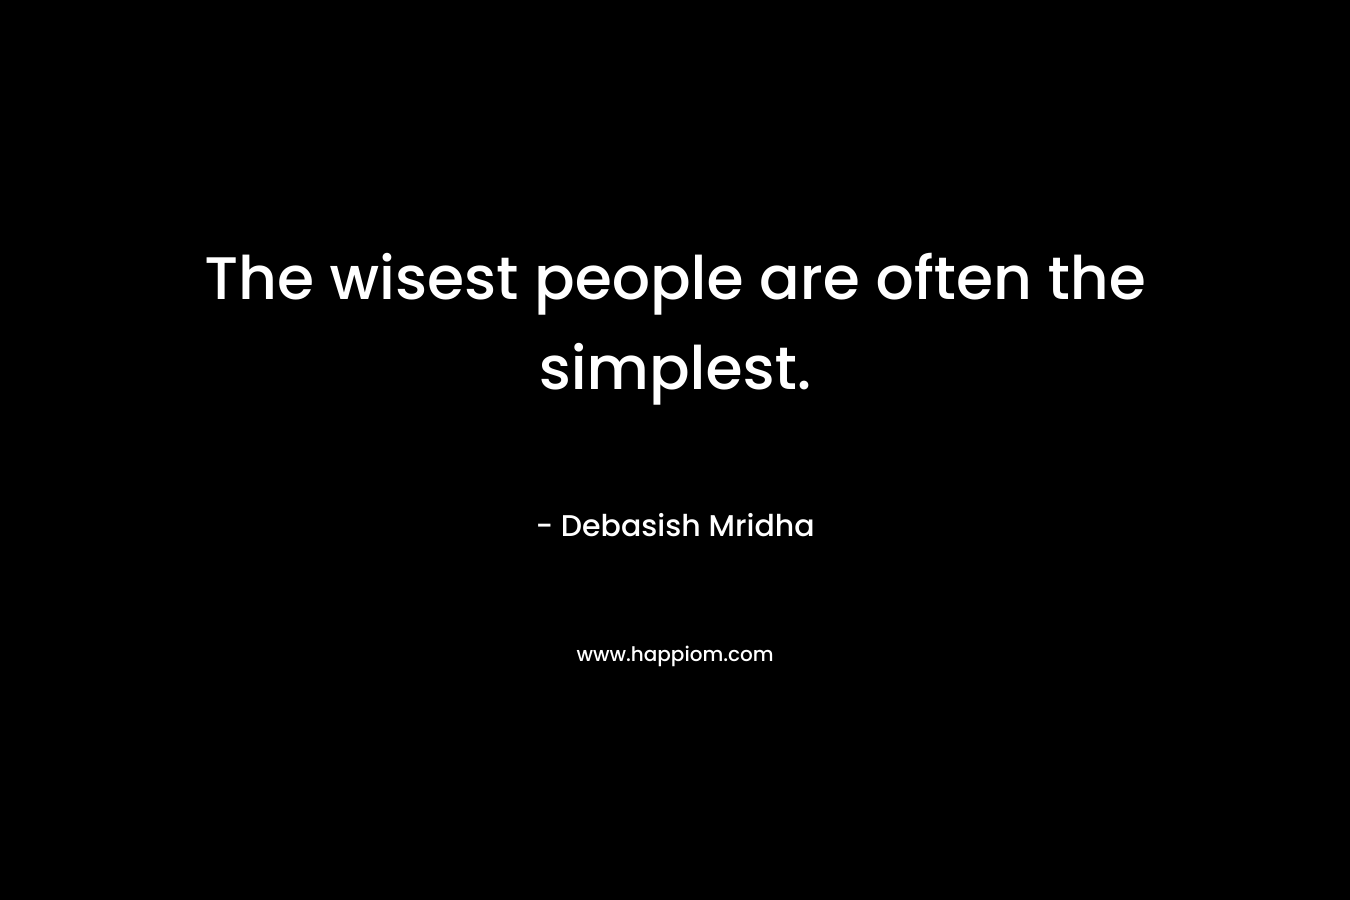 The wisest people are often the simplest.